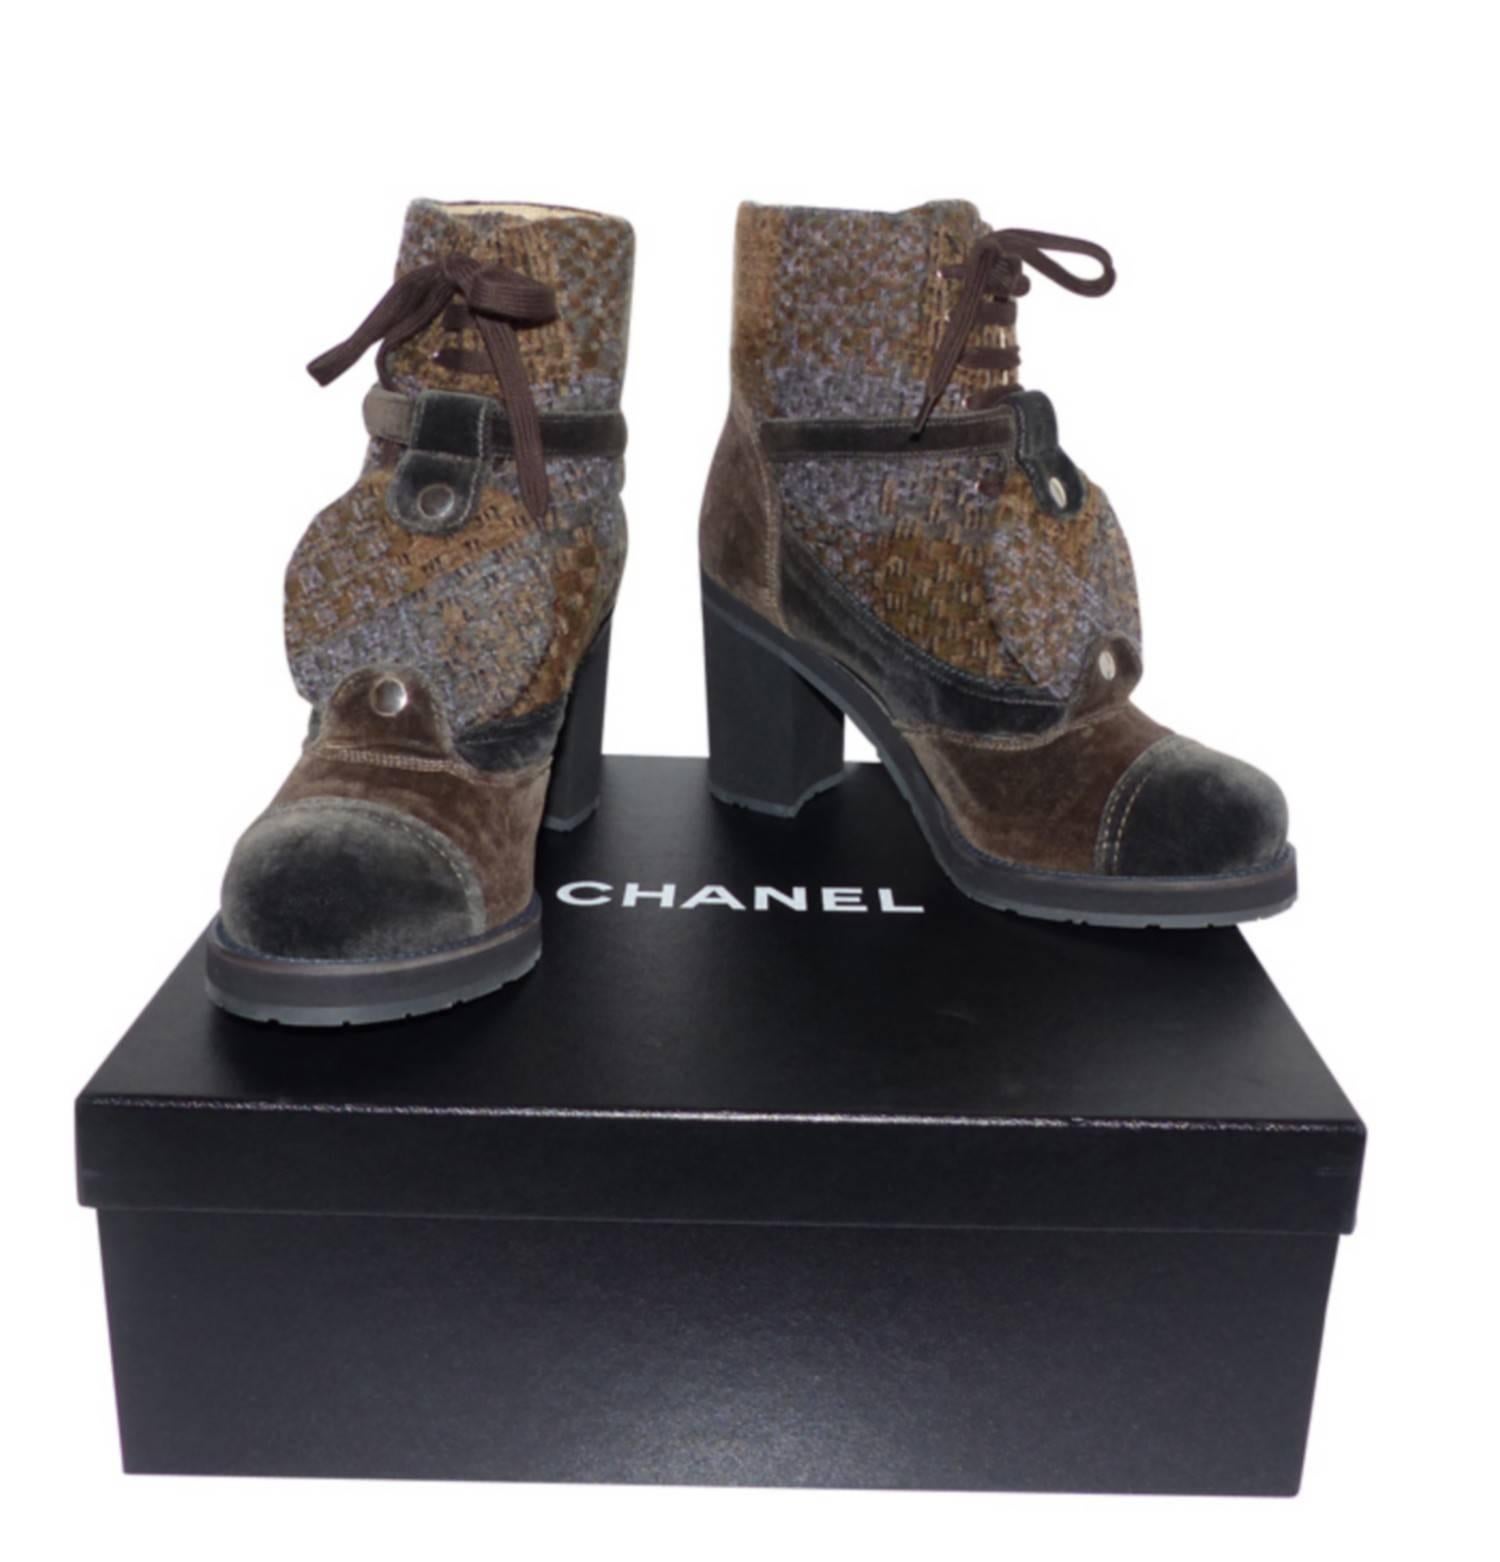 Beautiful pair of low boots Chanel in velvet bicolor brown and gray
Camel and gray tweed upper
Chanel silver lace and buckle
Heels in black gum.
Beige leather lining
EXCELLENTE CONDITION / LIKE NEW 
Its comes with Chanel box 
Long totale - Total